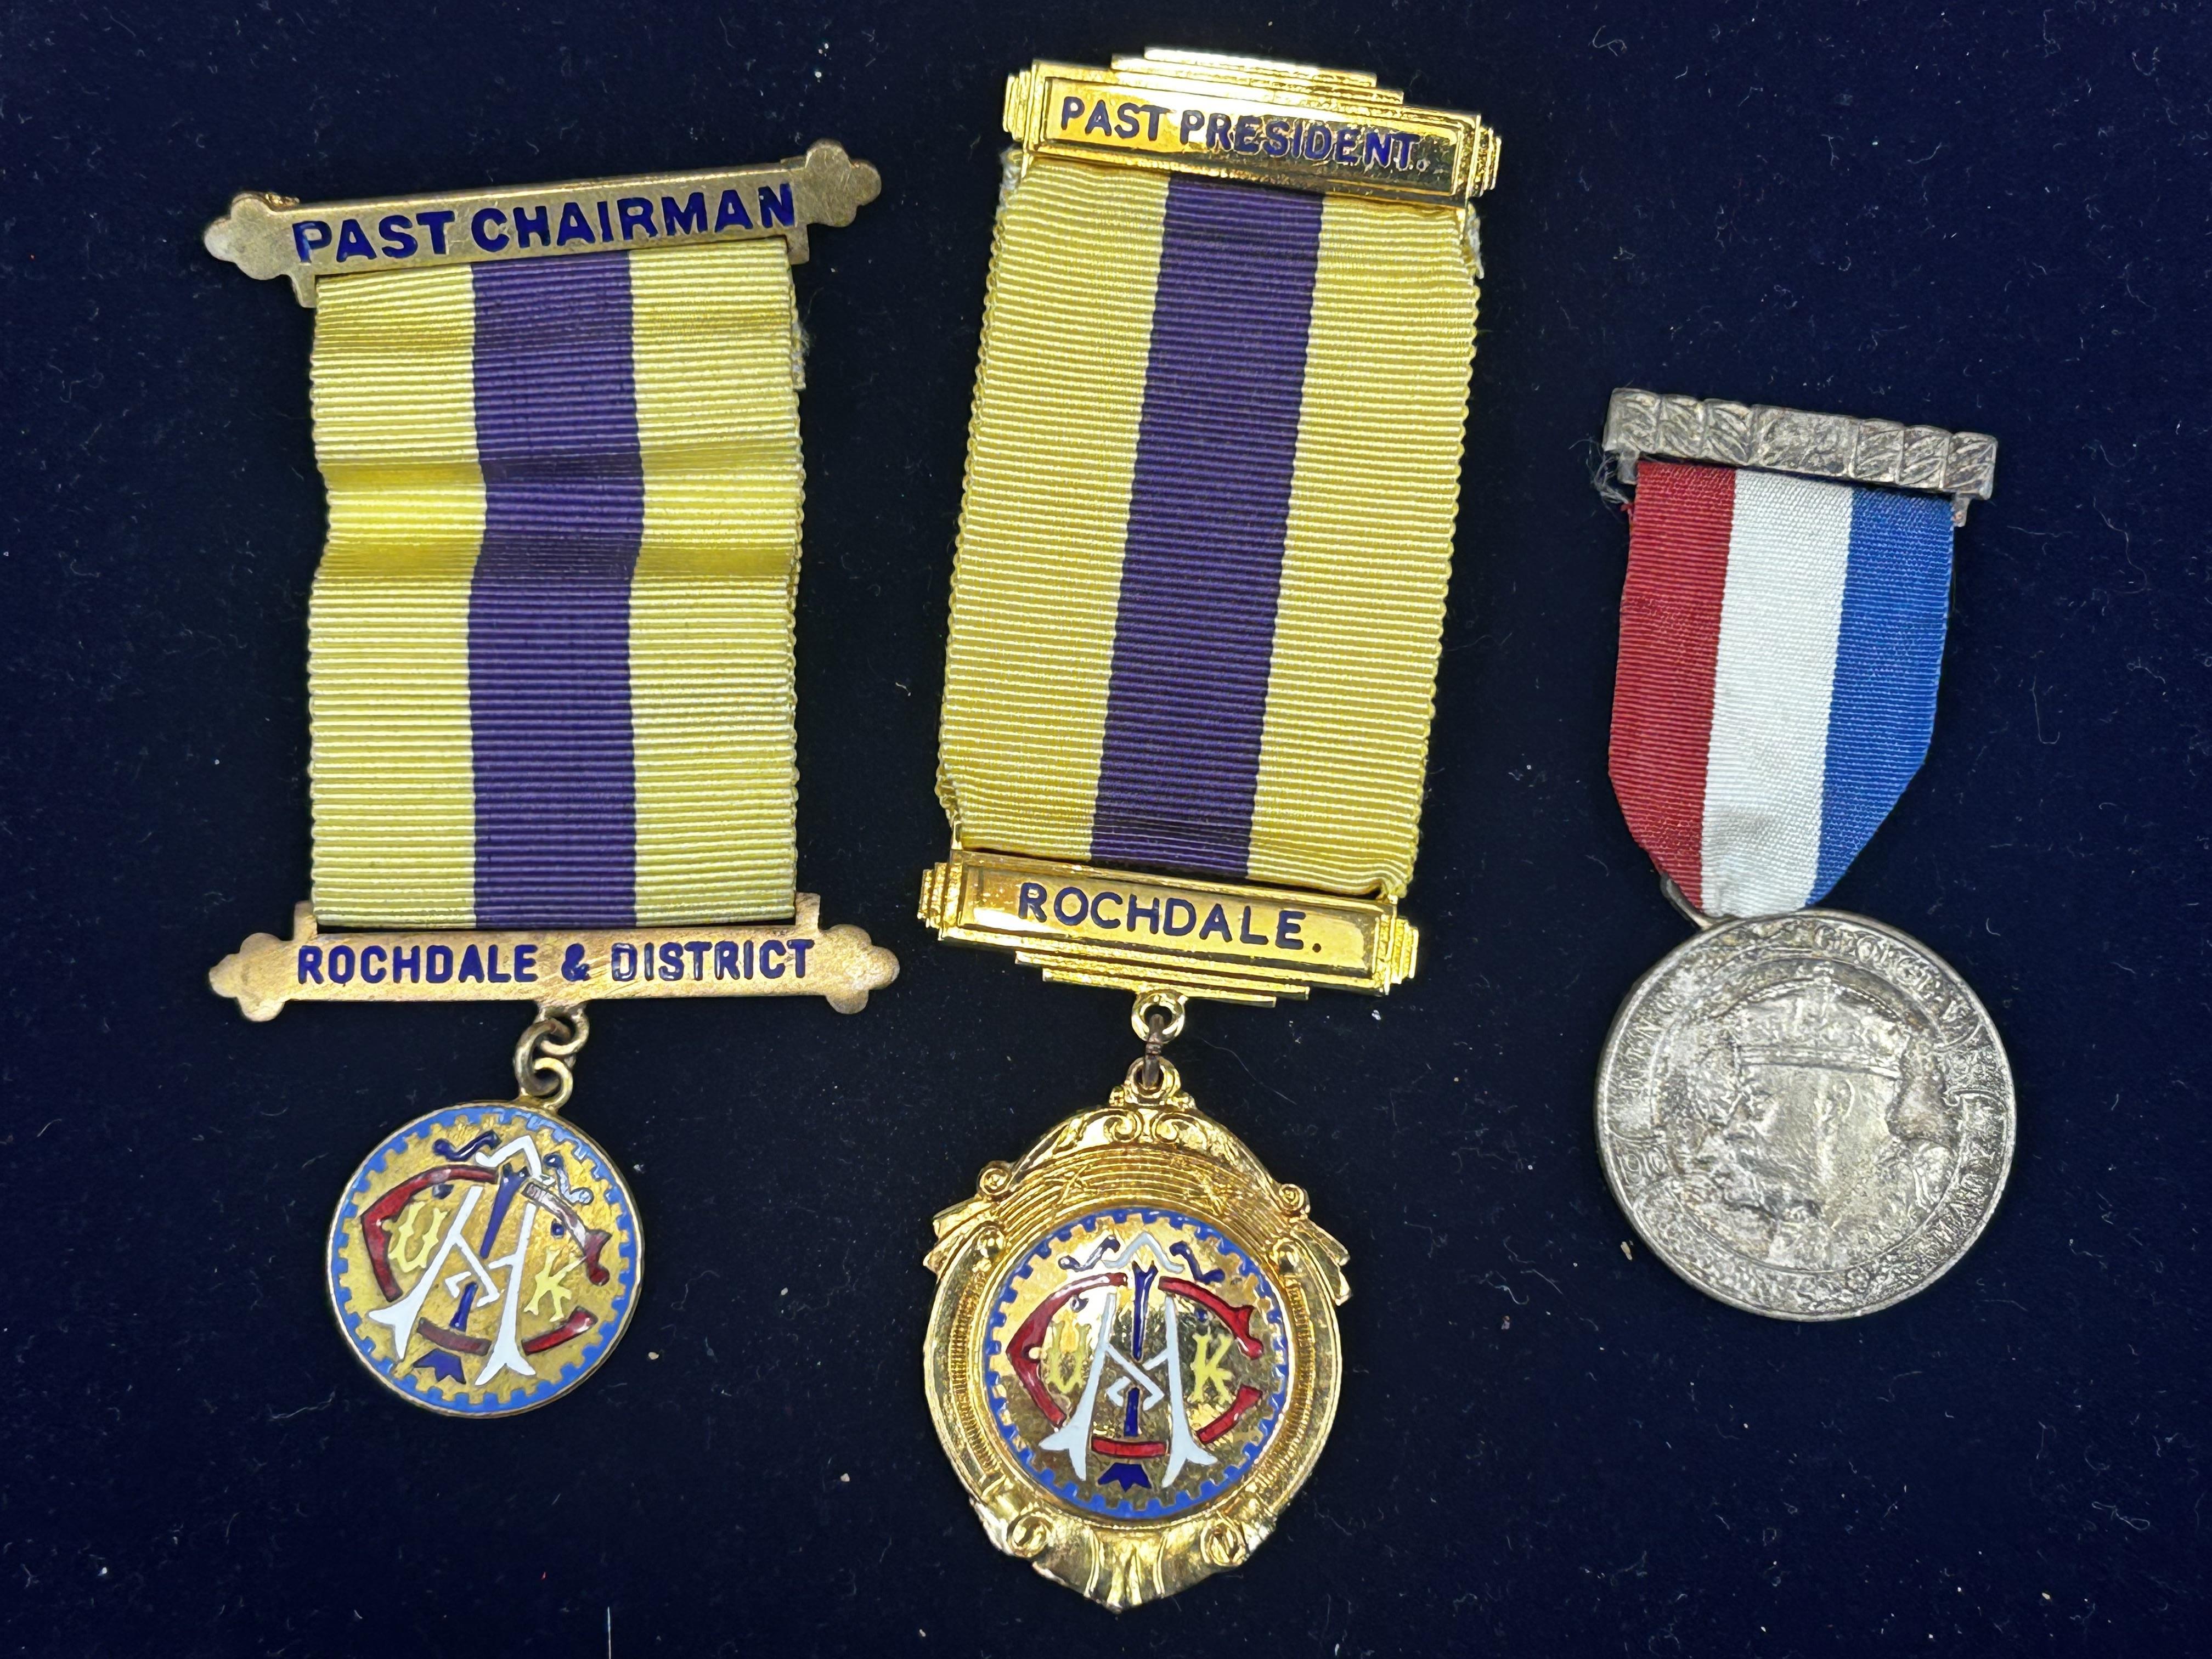 2 Masonic medals & Daily mail for King empire silv